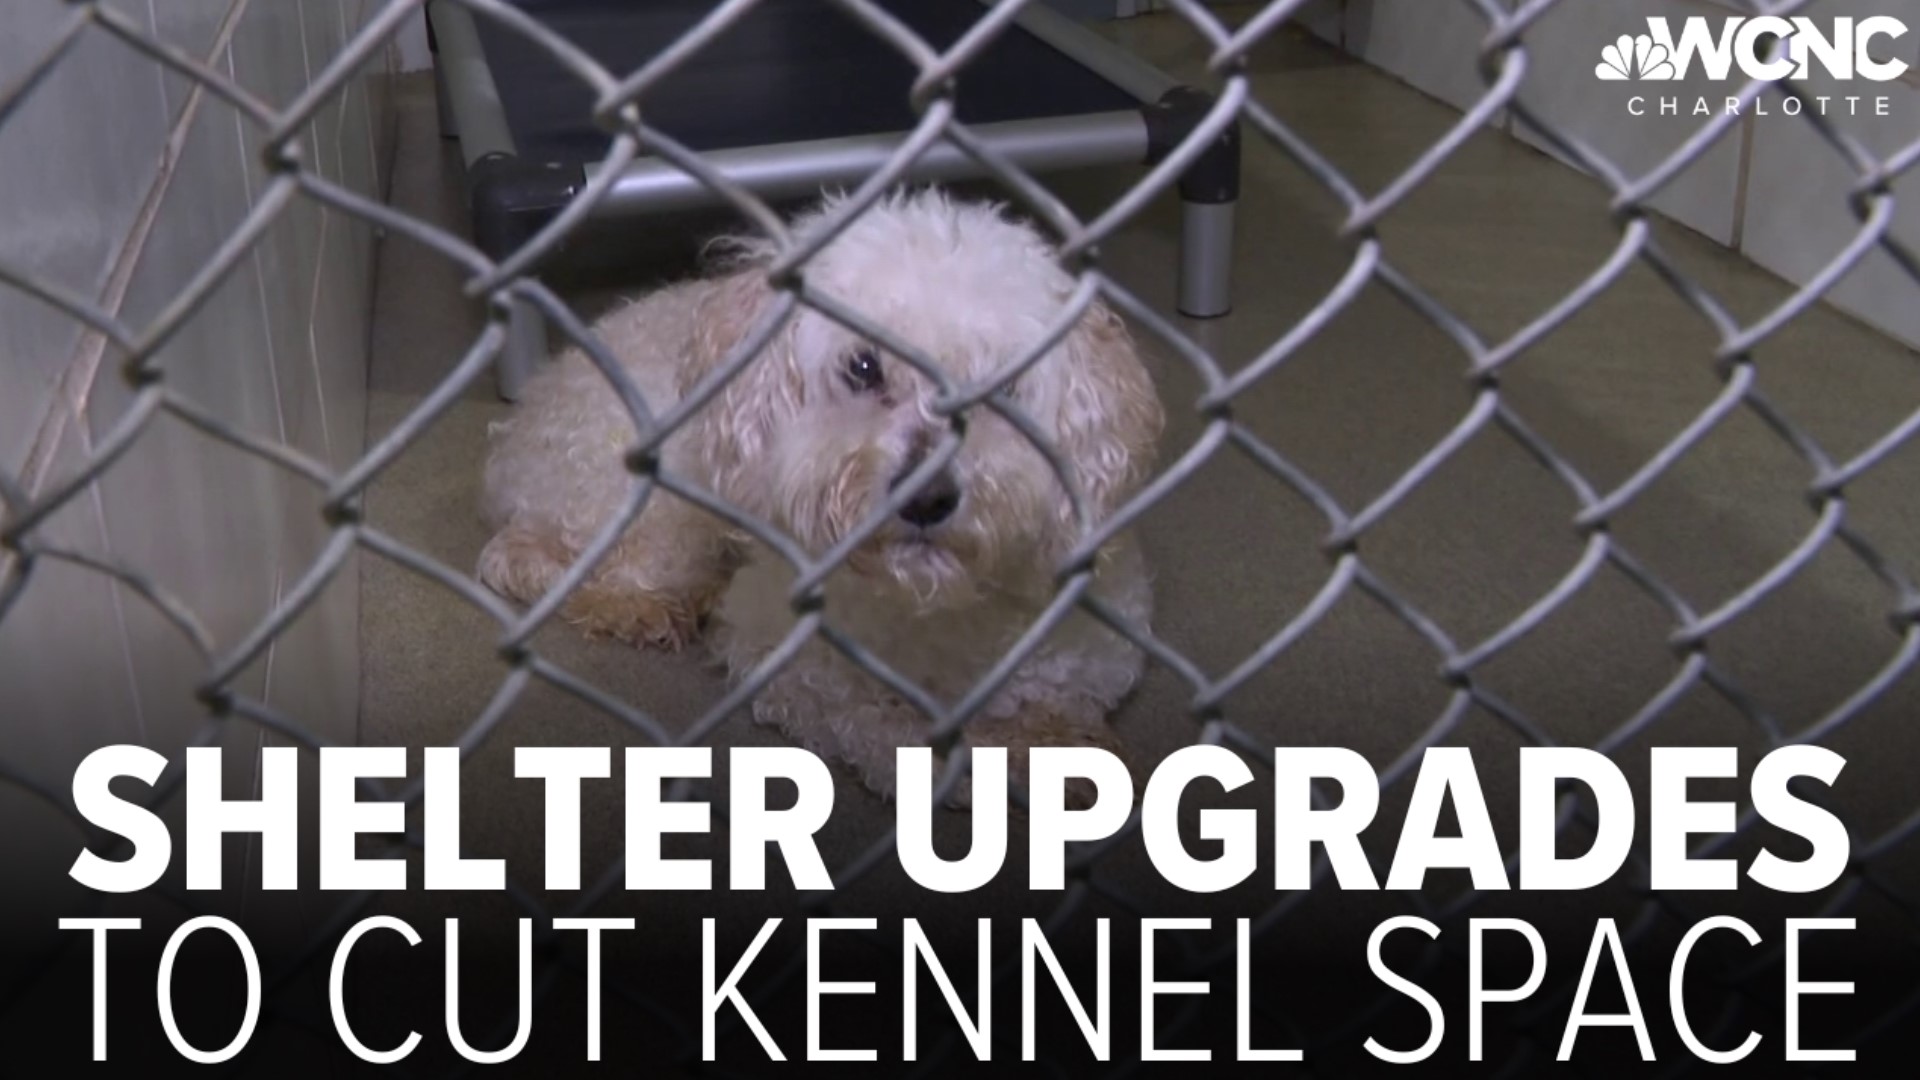 Charlotte's kennel capacity crisis could give the community its biggest test yet.